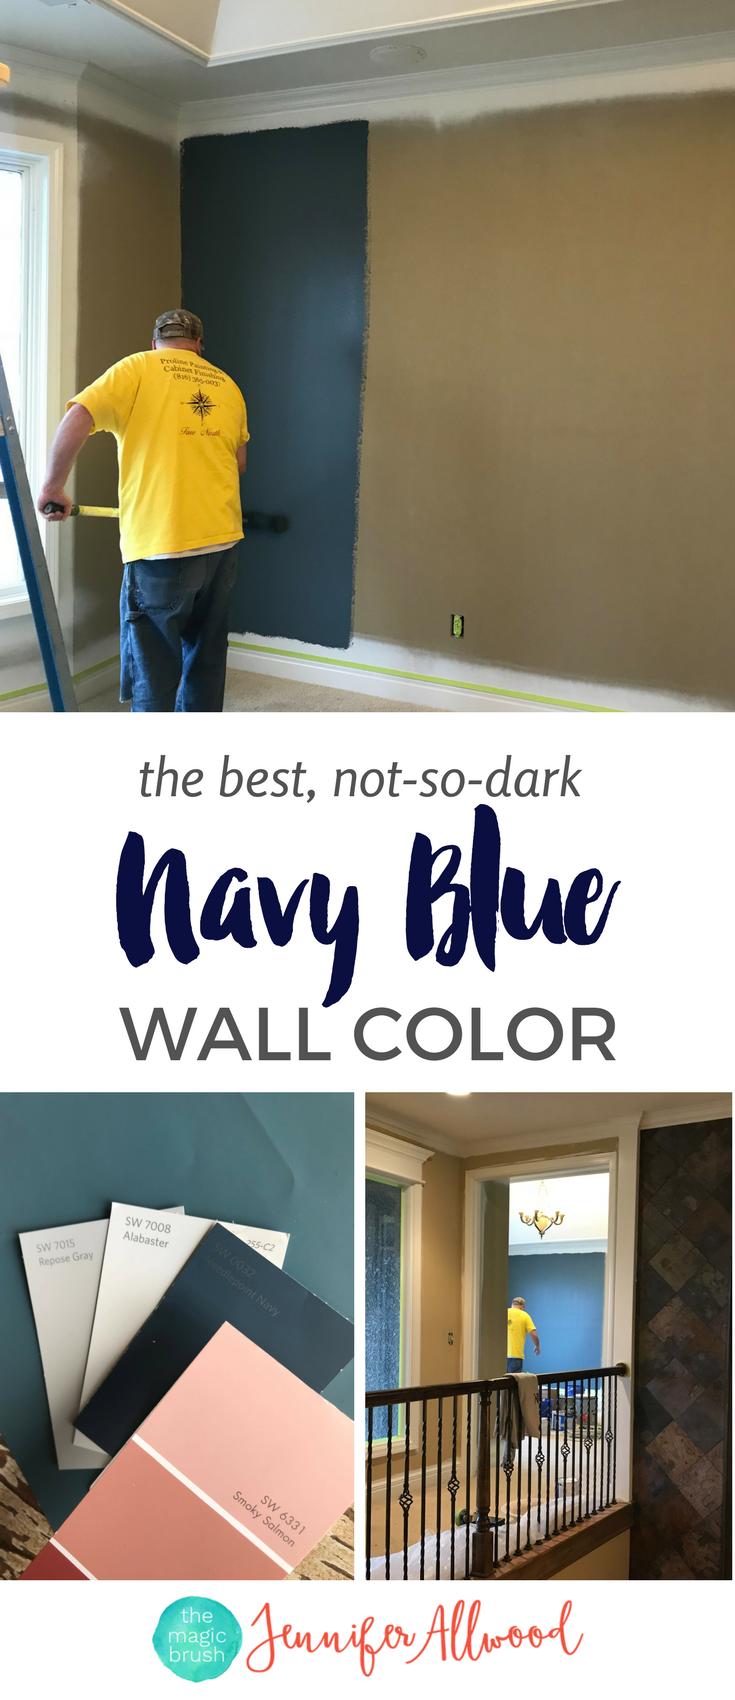 Navy Blue Wall Color _ Jennifer Allwood themagicbrushinc.com | Paint Color Ideas | Needlepoint Navy | Master Bedroom Wall Color Ideas